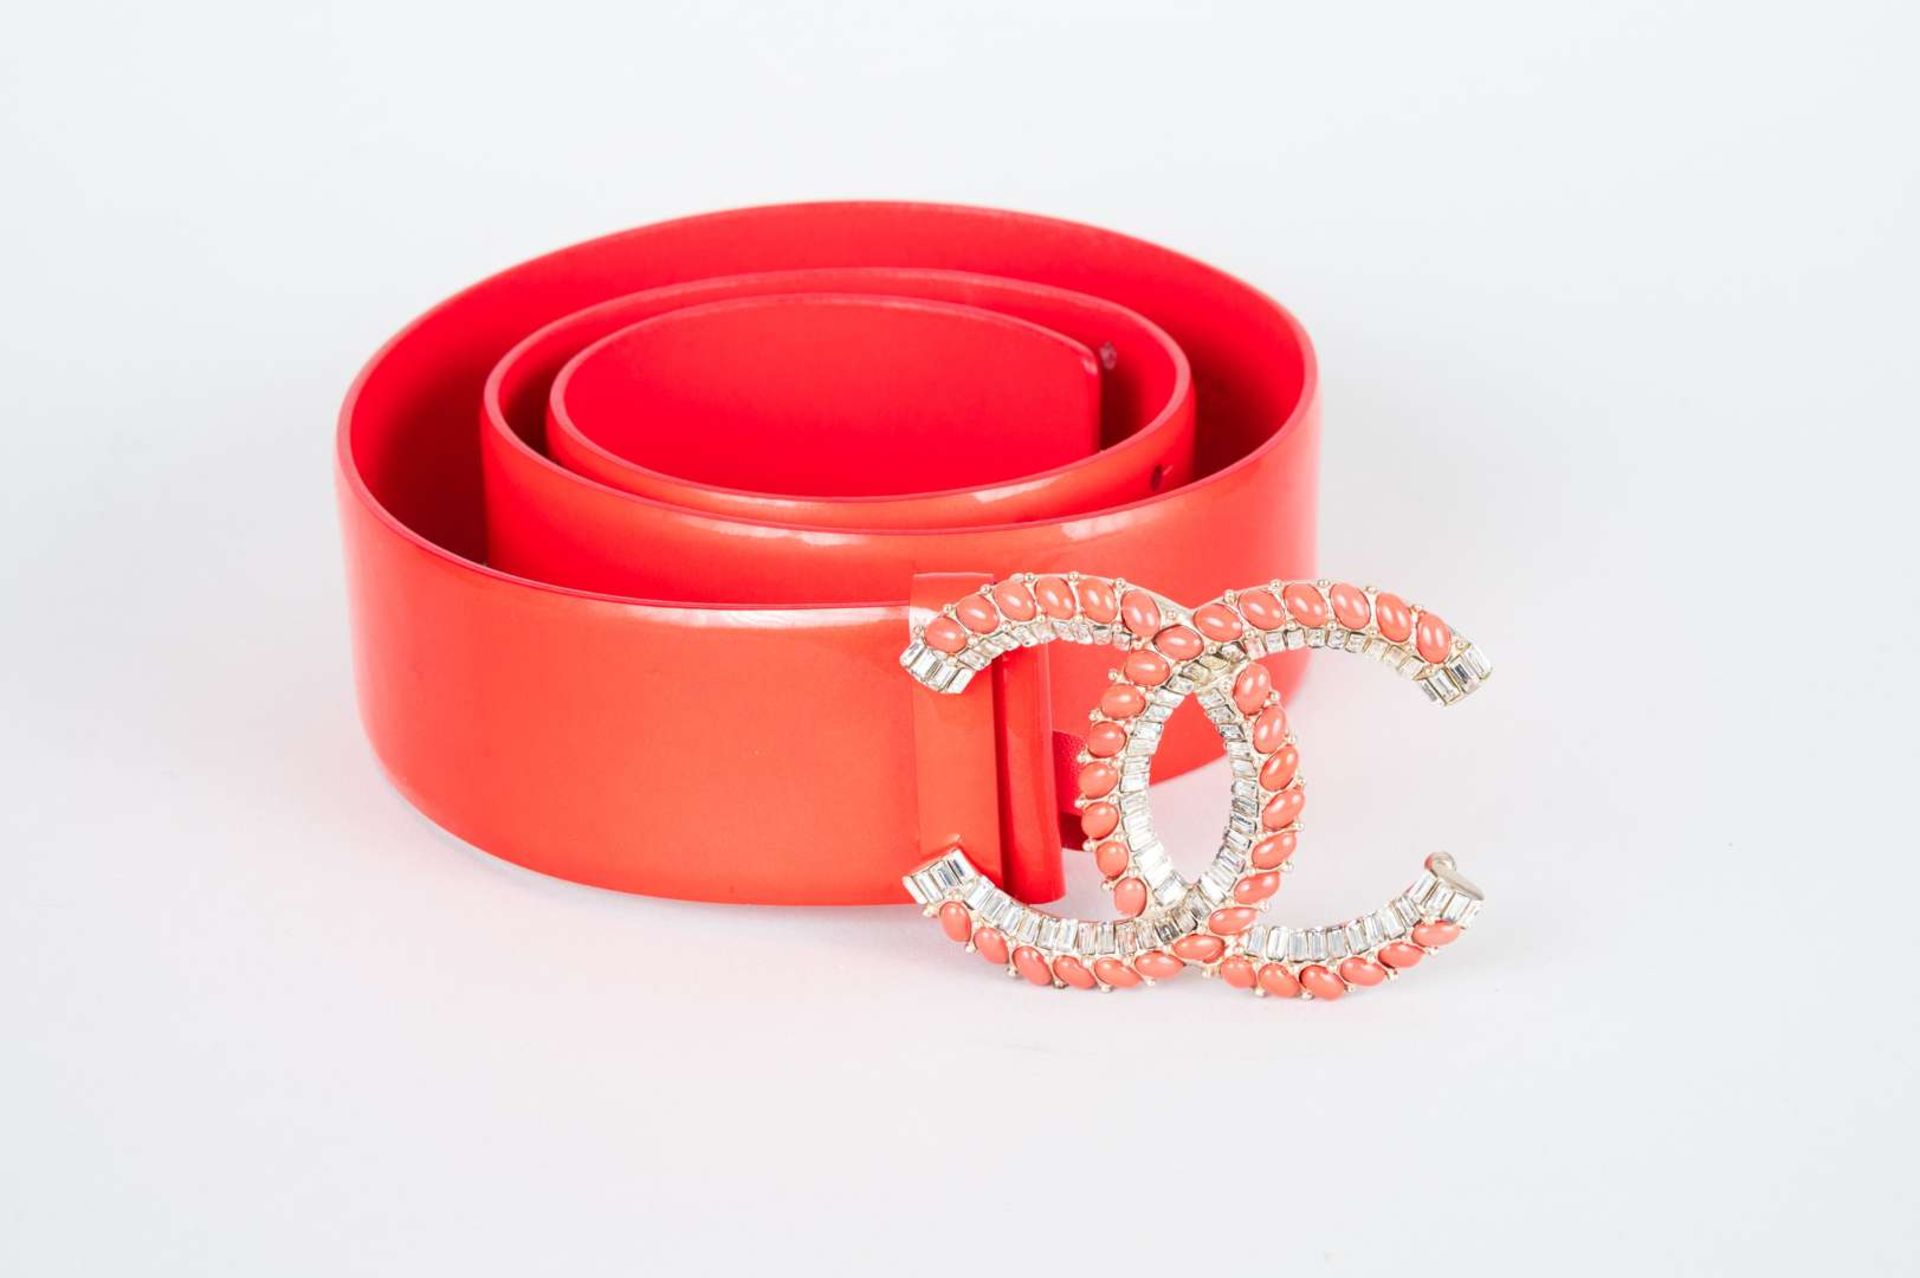 CHANEL, coral red, patent leather belt - Image 5 of 6